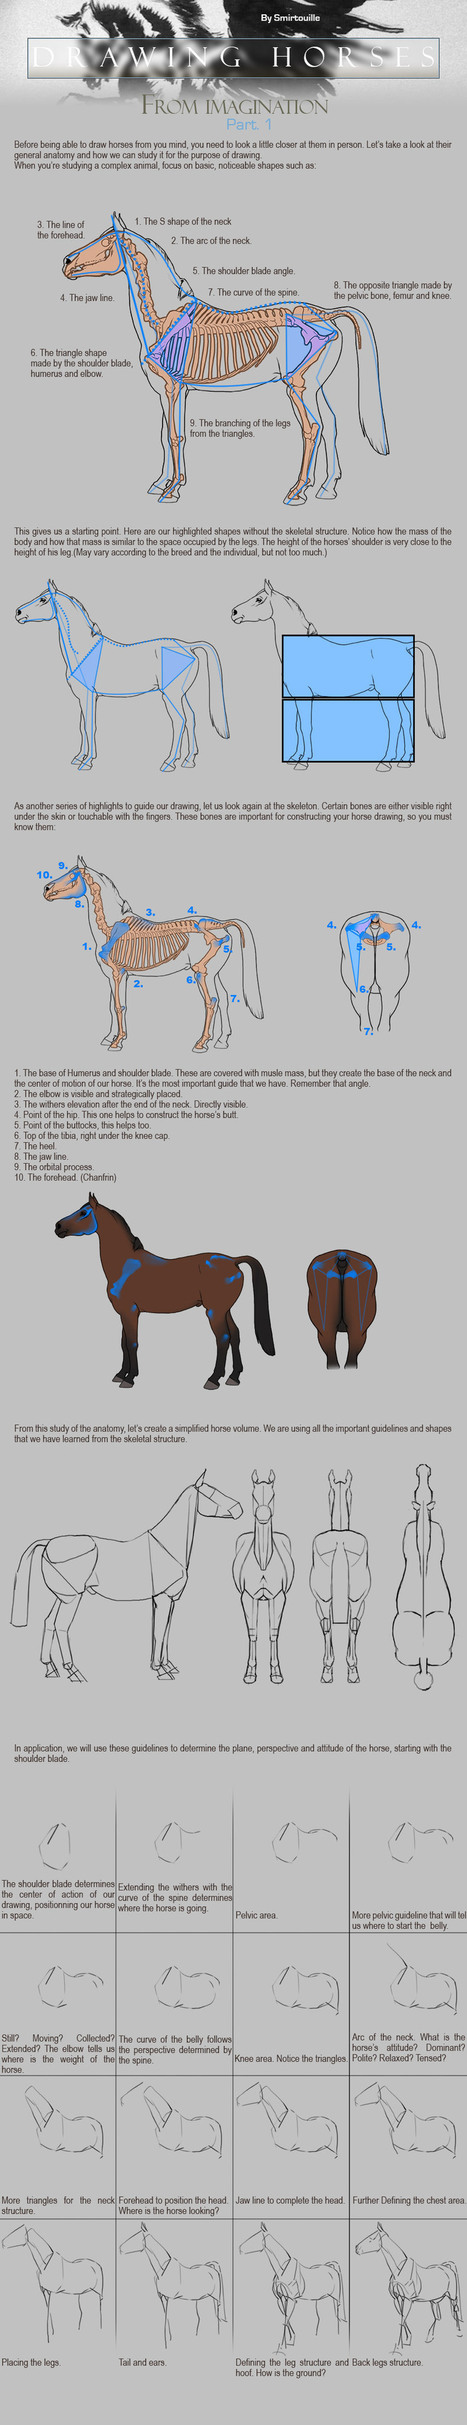 Drawing Horses Tutorial - Part 1 | Drawing and Painting Tutorials | Scoop.it